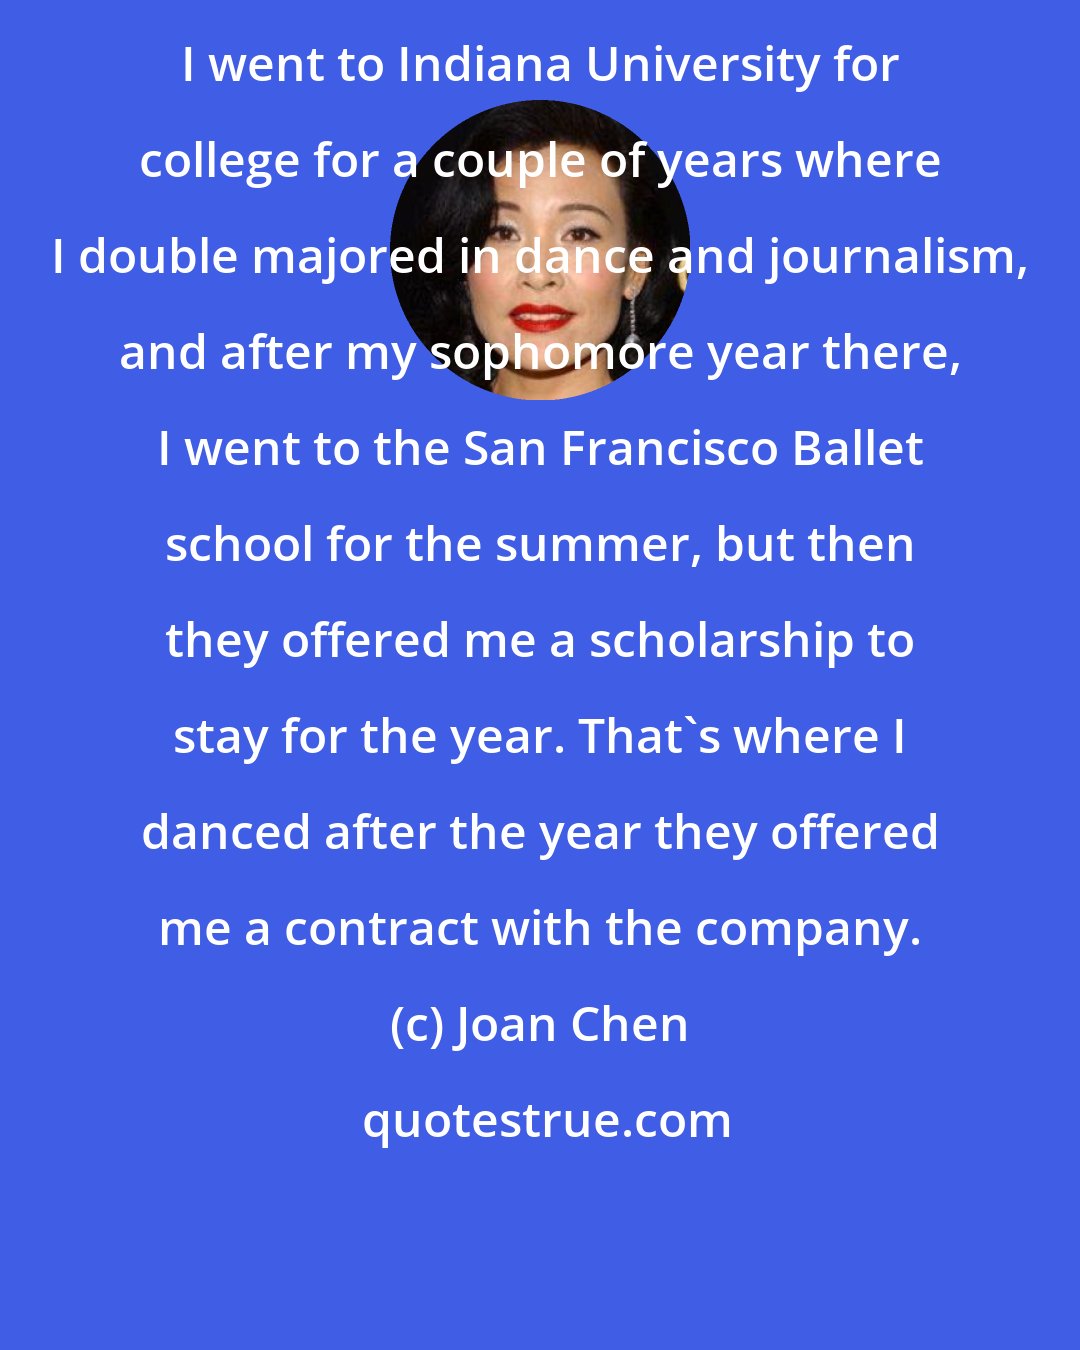 Joan Chen: I went to Indiana University for college for a couple of years where I double majored in dance and journalism, and after my sophomore year there, I went to the San Francisco Ballet school for the summer, but then they offered me a scholarship to stay for the year. That's where I danced after the year they offered me a contract with the company.